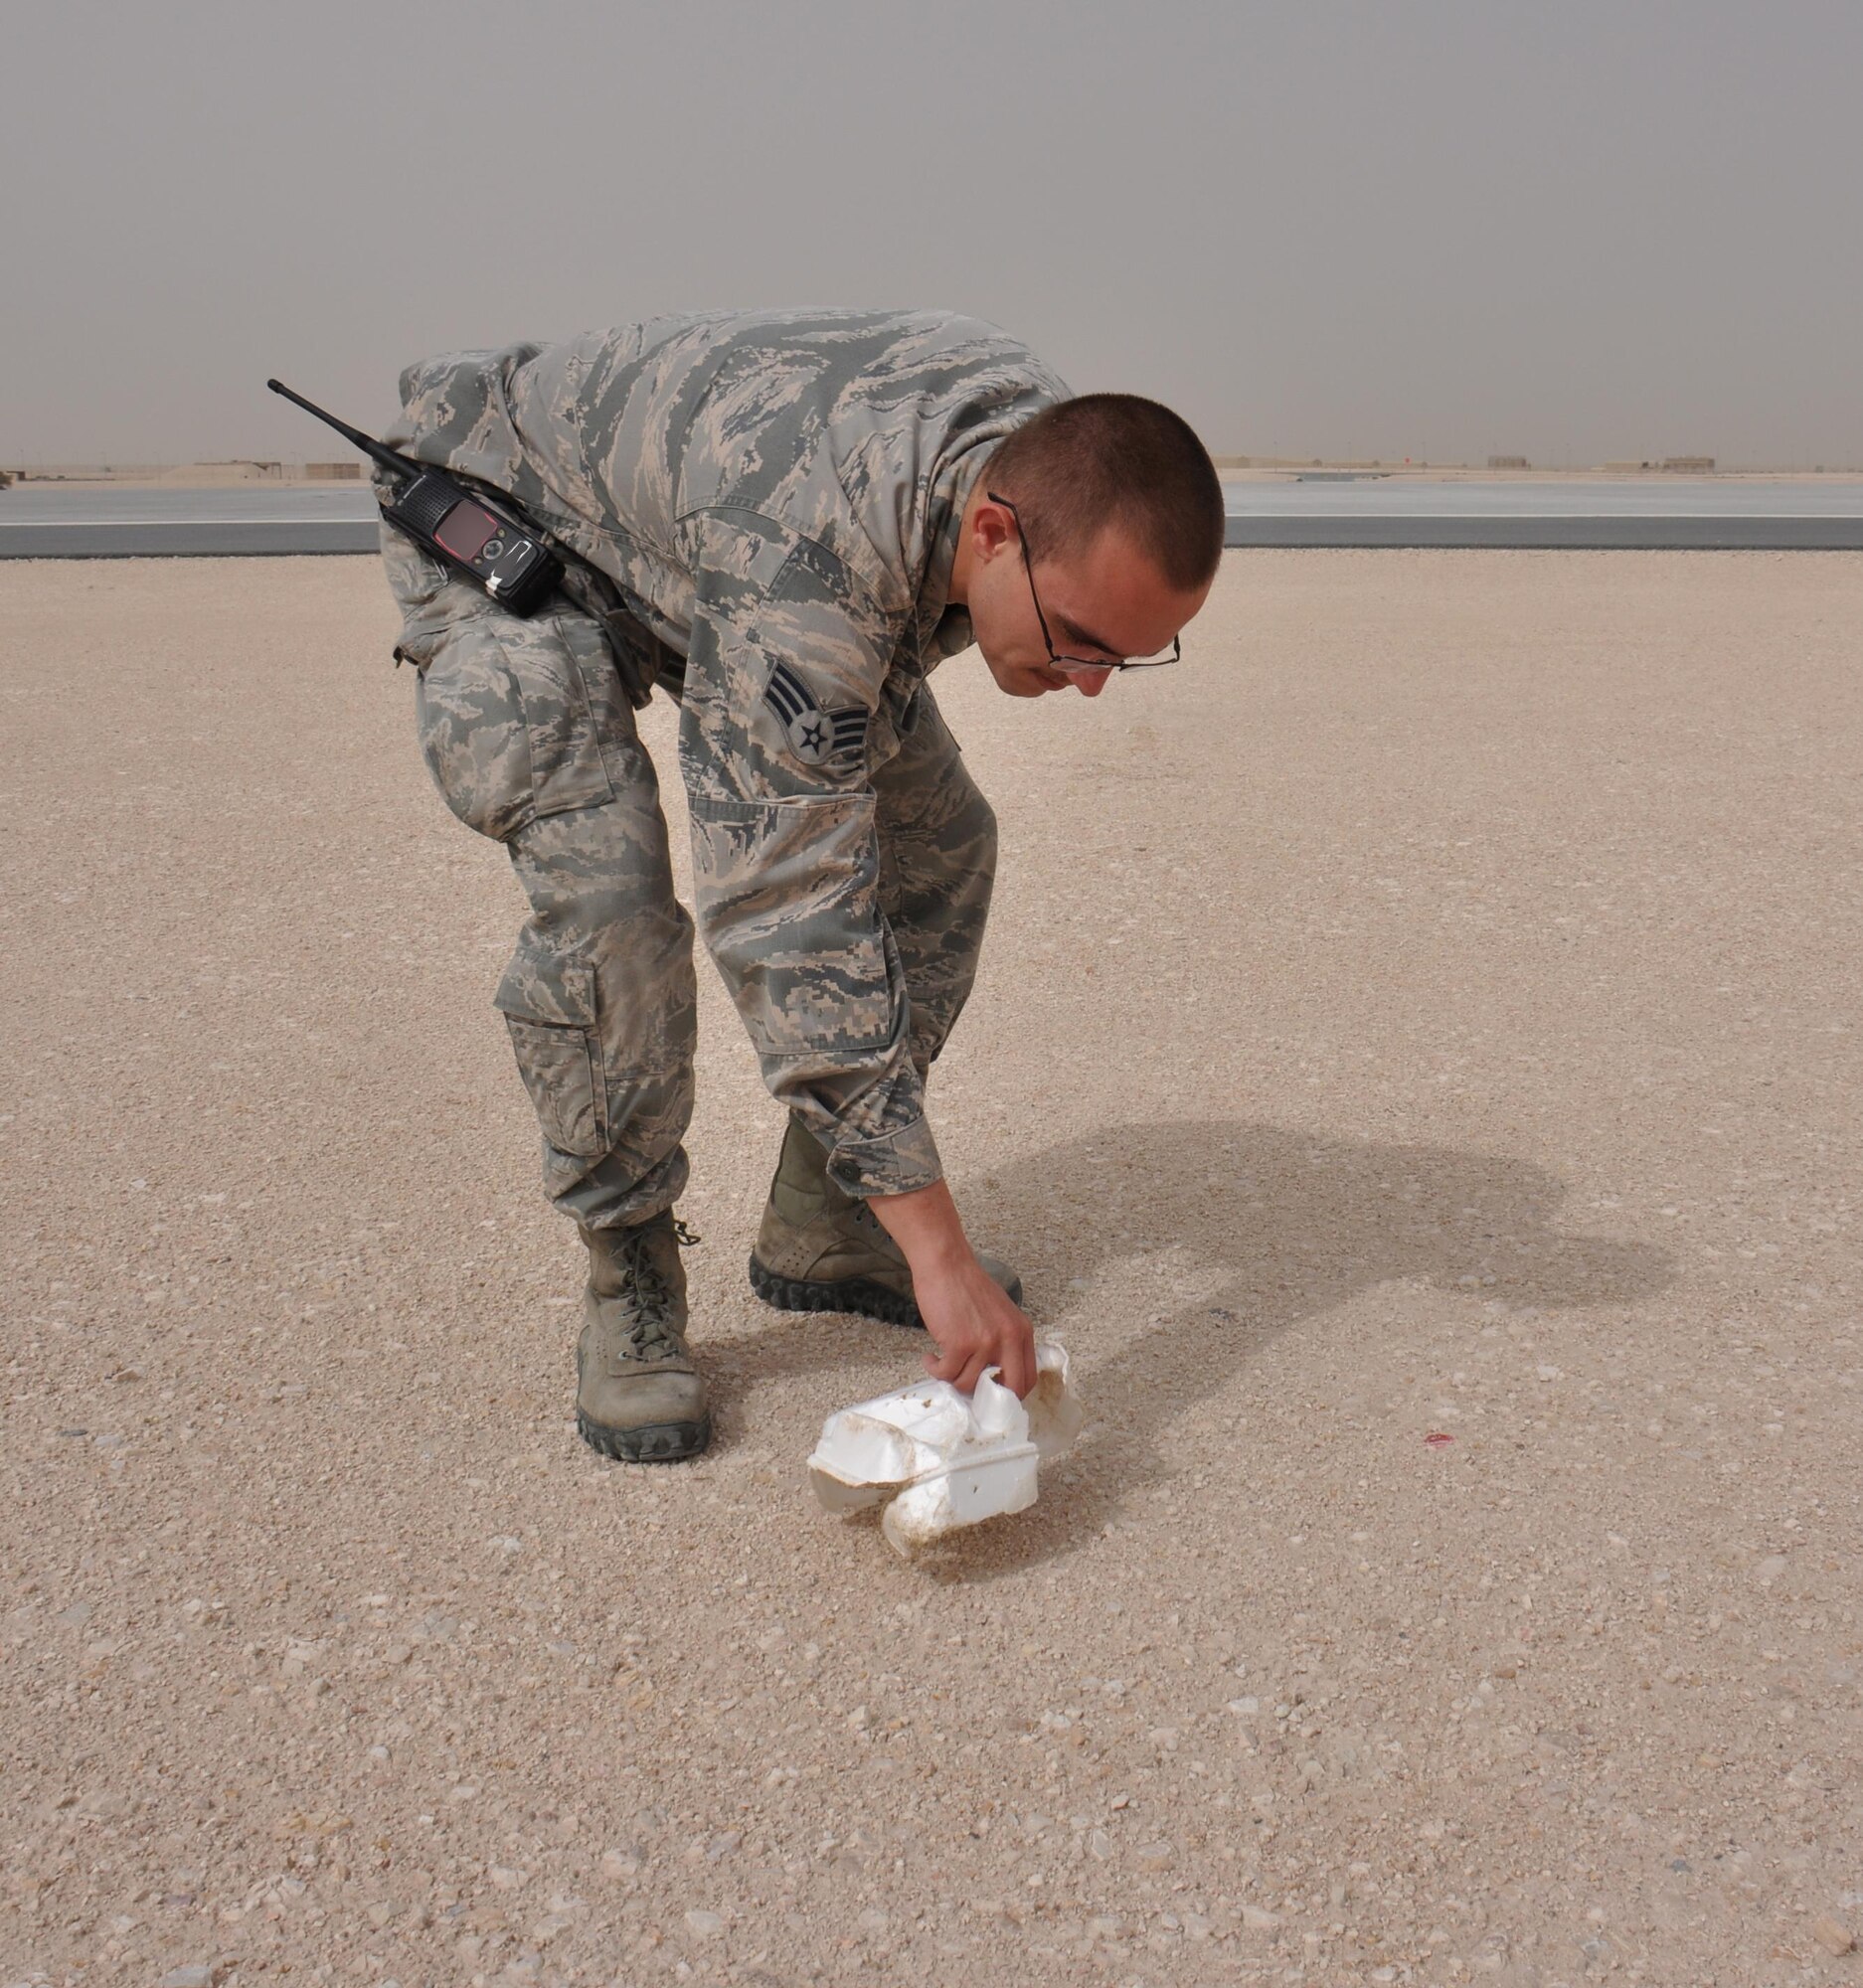 Senior Airman Logan Winter, 379th Expeditionary Operations Support Squadron Airfield Management journeyman from Quincy, Washington, picks up a piece of trash near a runway at Al Udeid Air Base, Qatar March 28. Winter conducts several checks of the airfield each day to ensure foreign objects and debris are removed. In 2015, the 379 EOSS Airfield Management team supported more than 20,000 sorties. Photo altered for security purposes. (U.S. Air Force photo by Tech. Sgt. James Hodgman/Released)